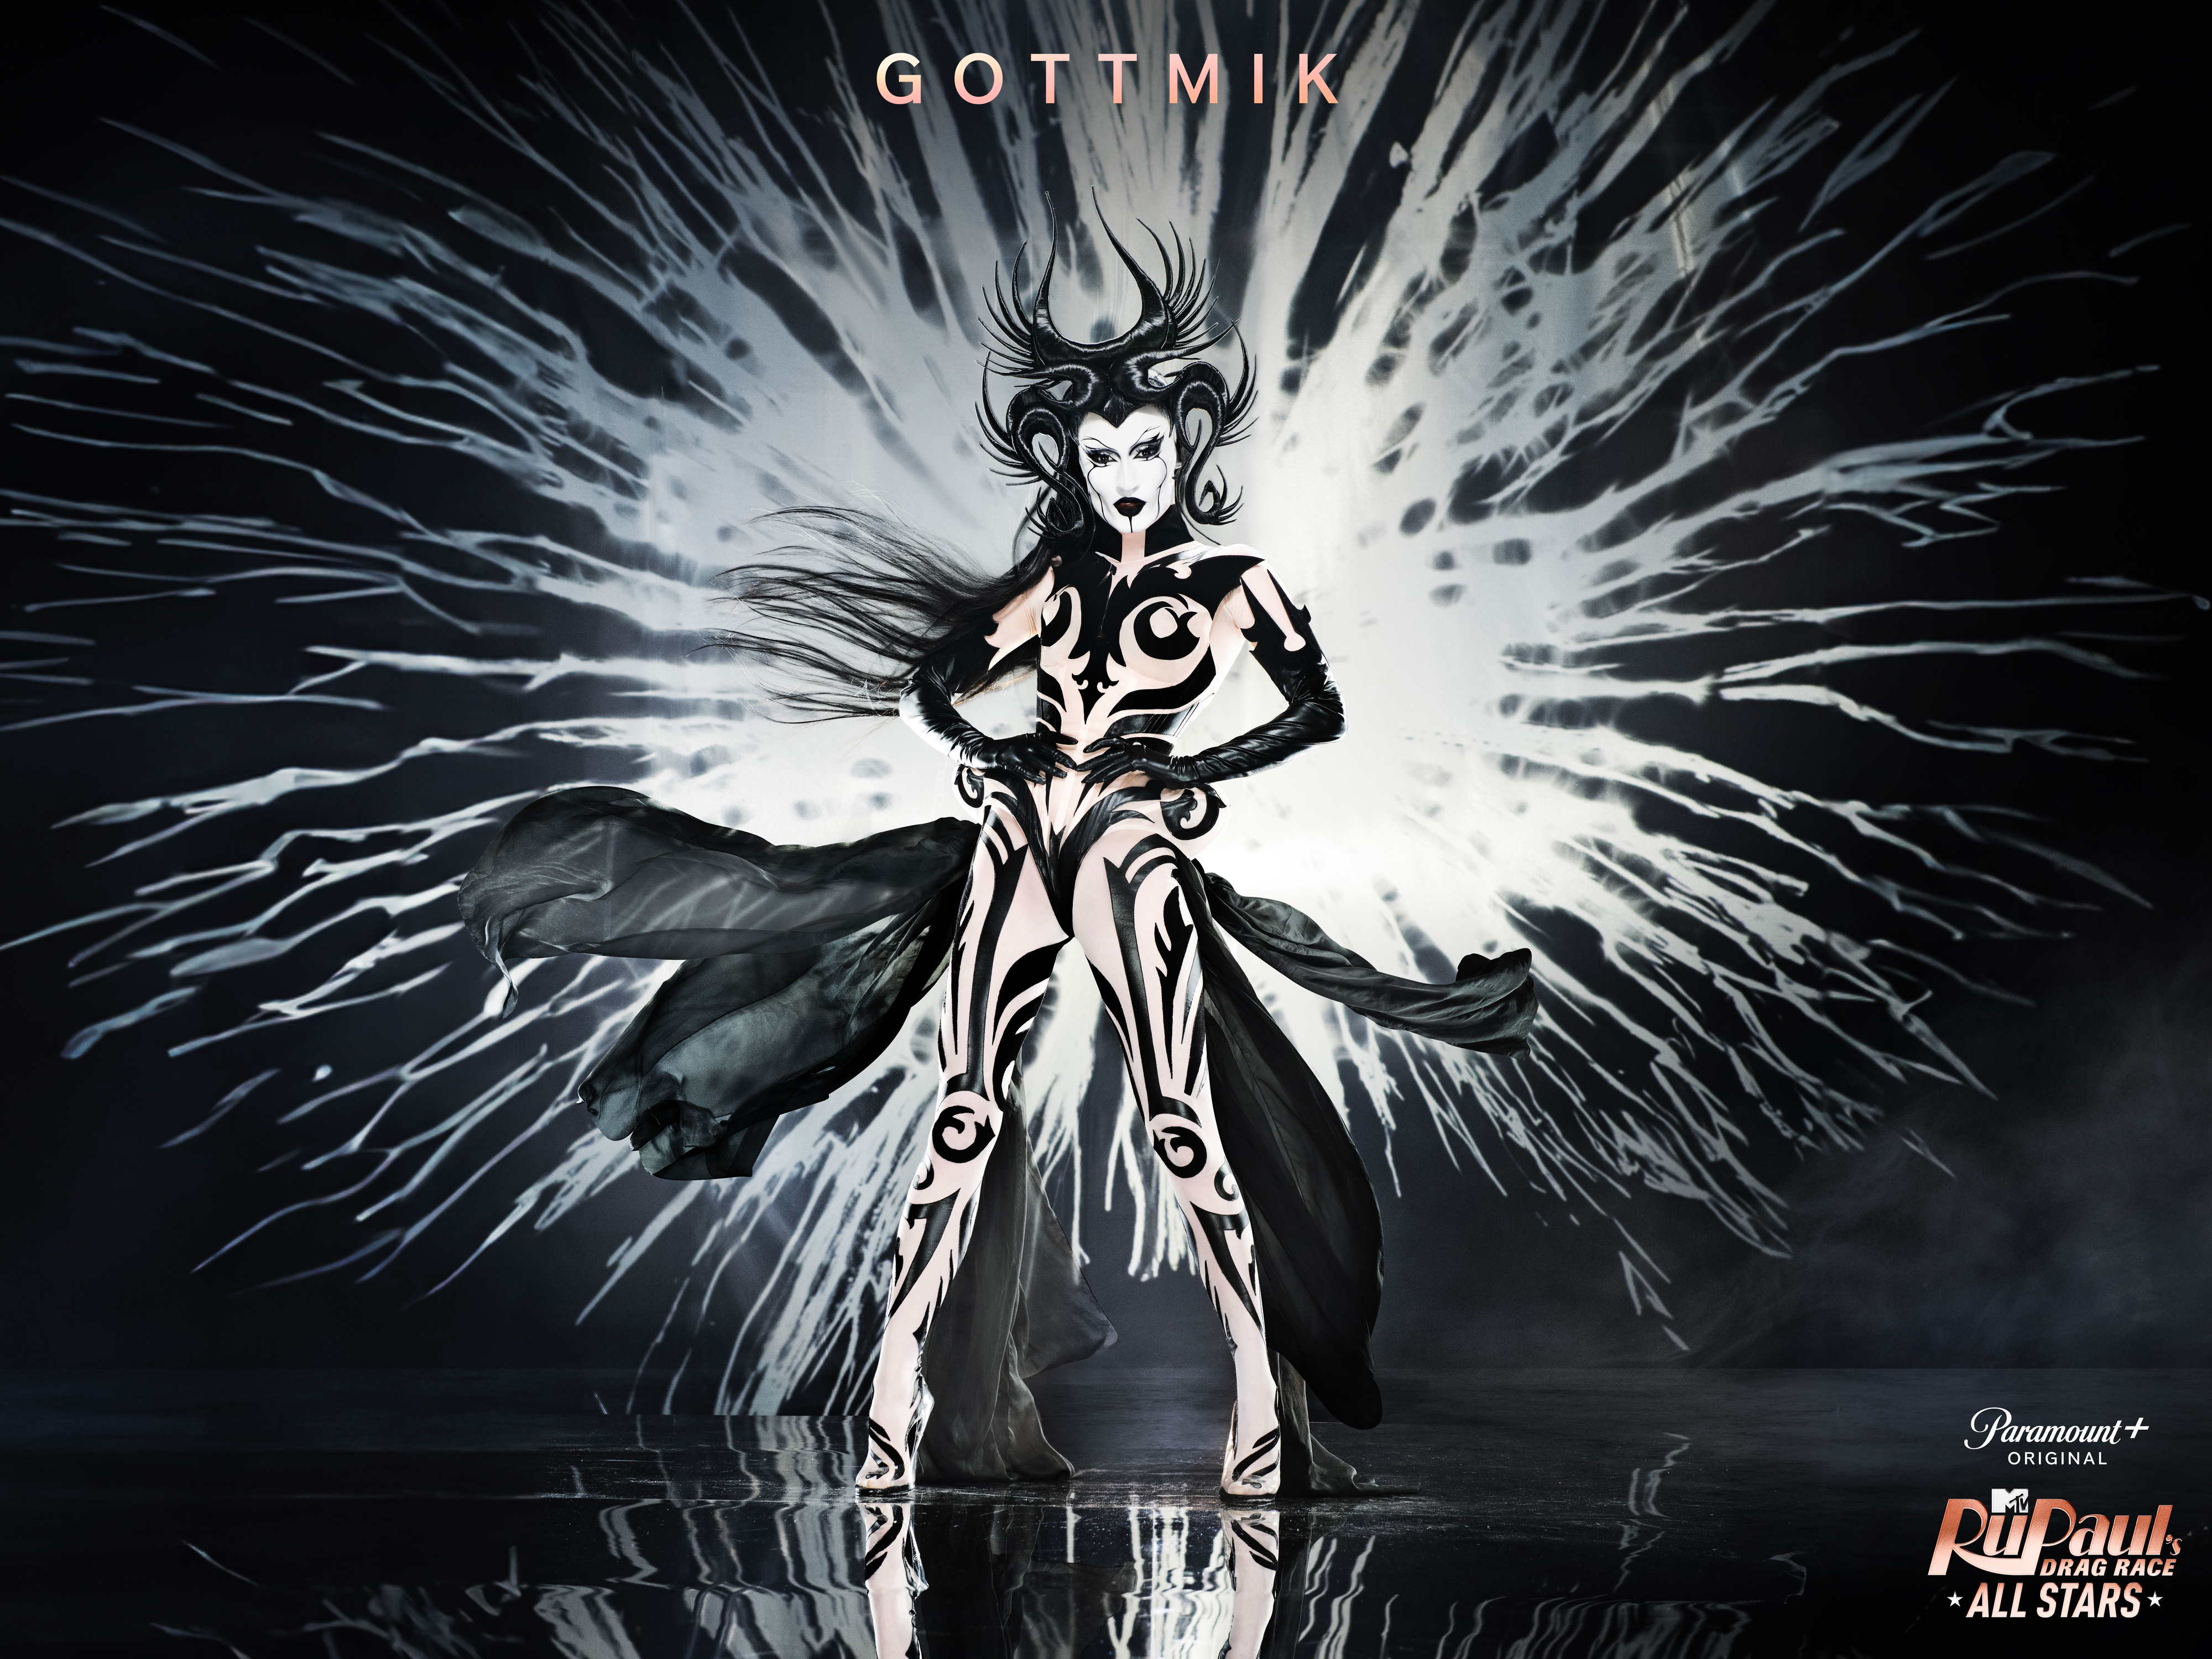 Gottmik in dramatic black and white outfit with splatter design